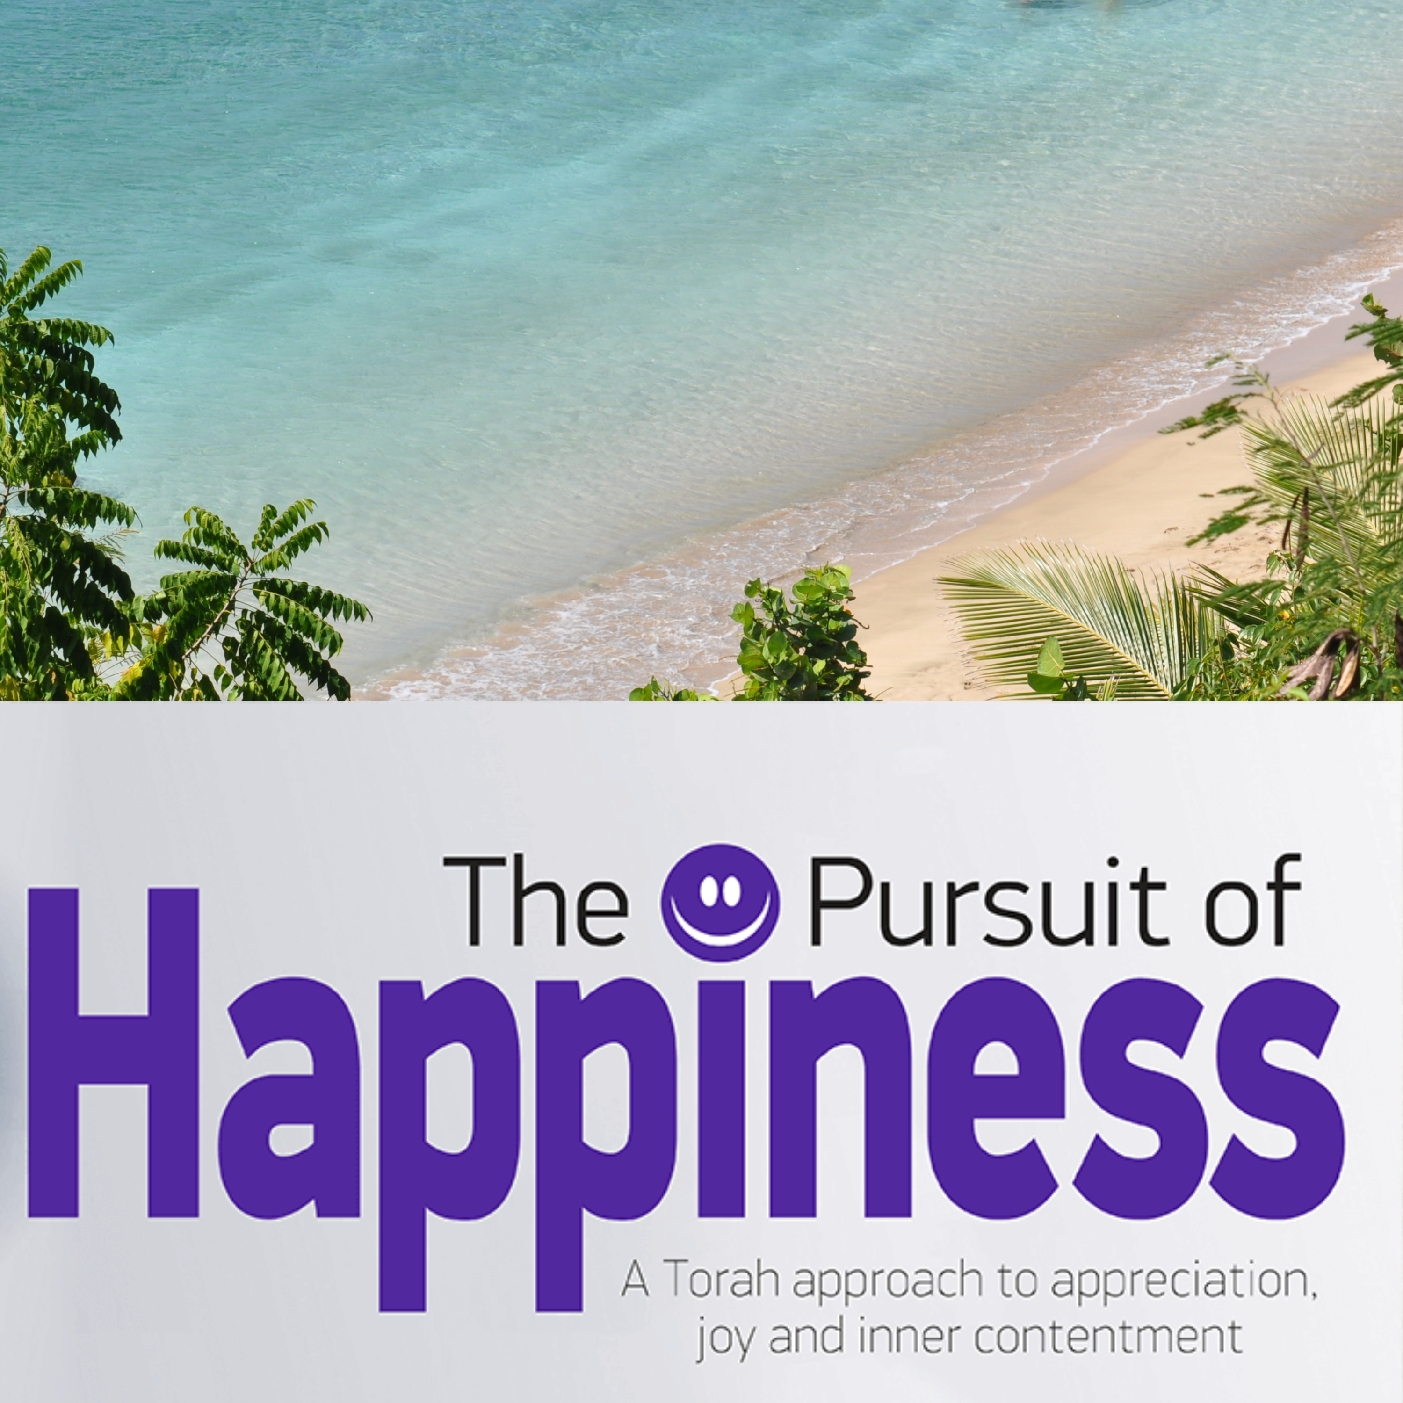 The Pursuit of Happiness- Are You Happy?